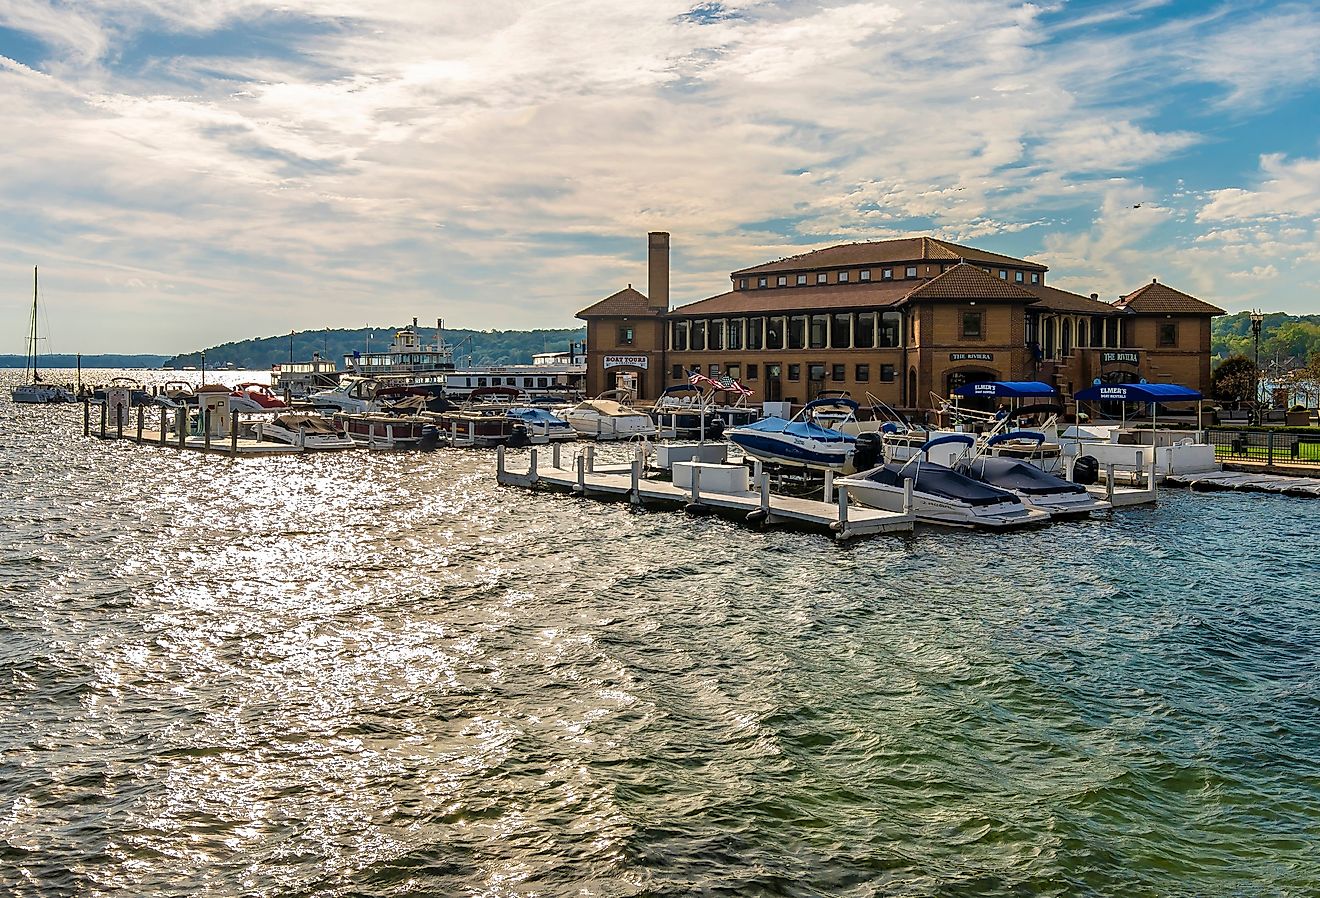 Riviera shops and boat house view in Geneva Town of Wisconsin. Image credit Nejdet Duzen via Shutterstock